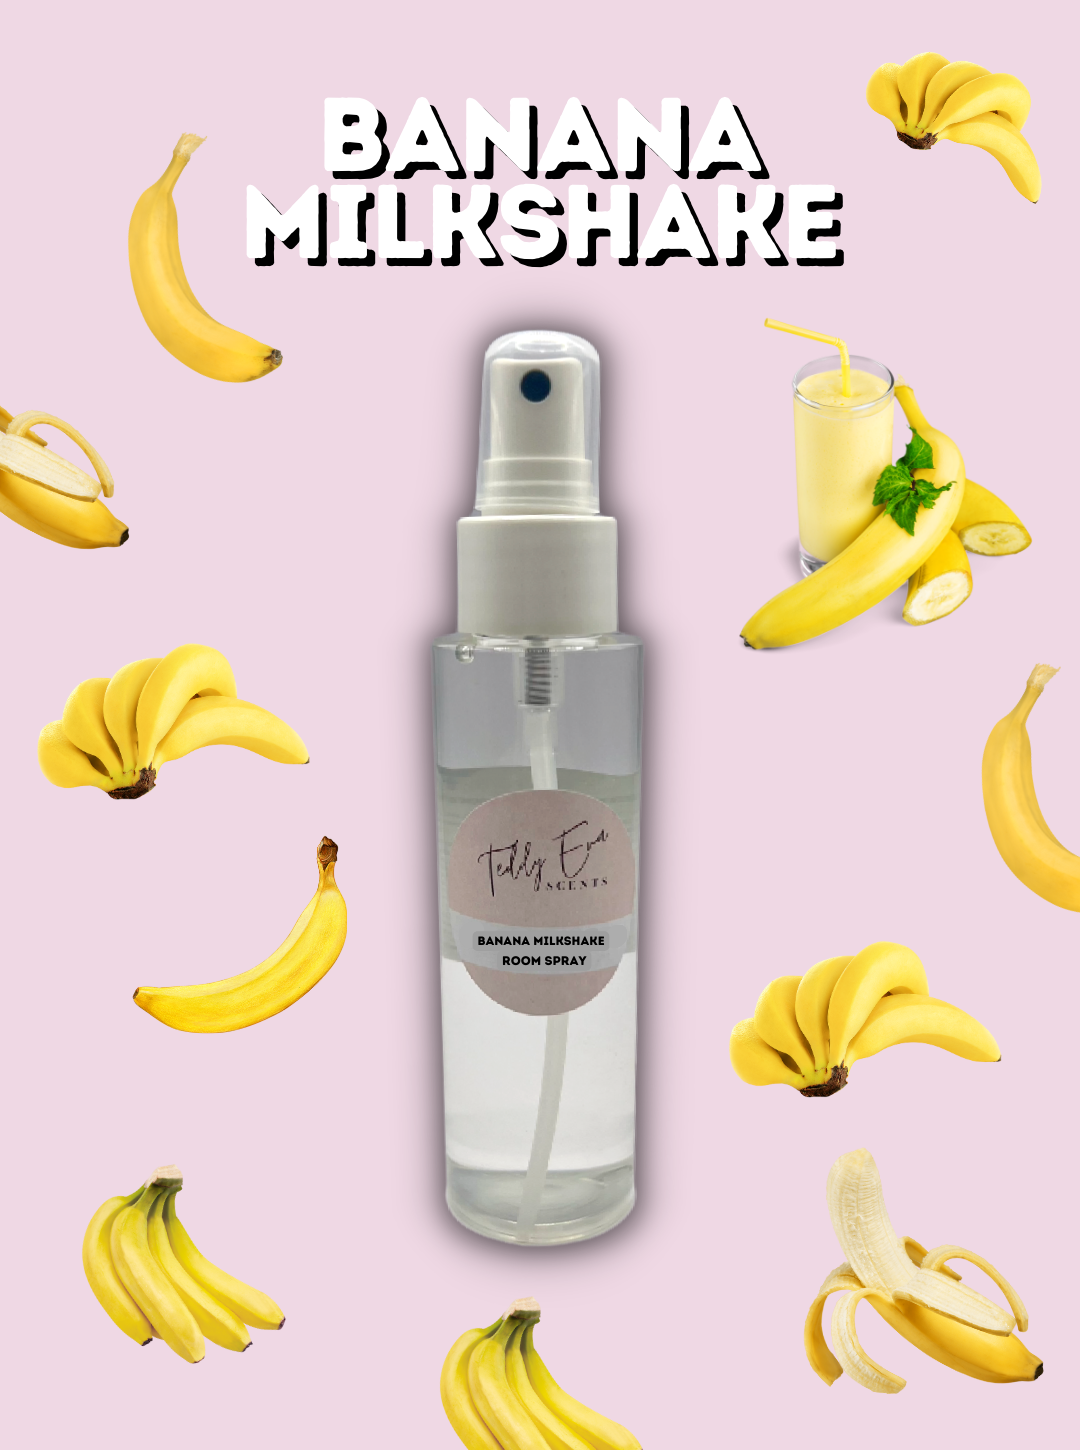 Do you like having a quick blast of freshness in your room via a spray bottle? Well welcome to our 100ml room sprays! This one is Banana Milkshake!